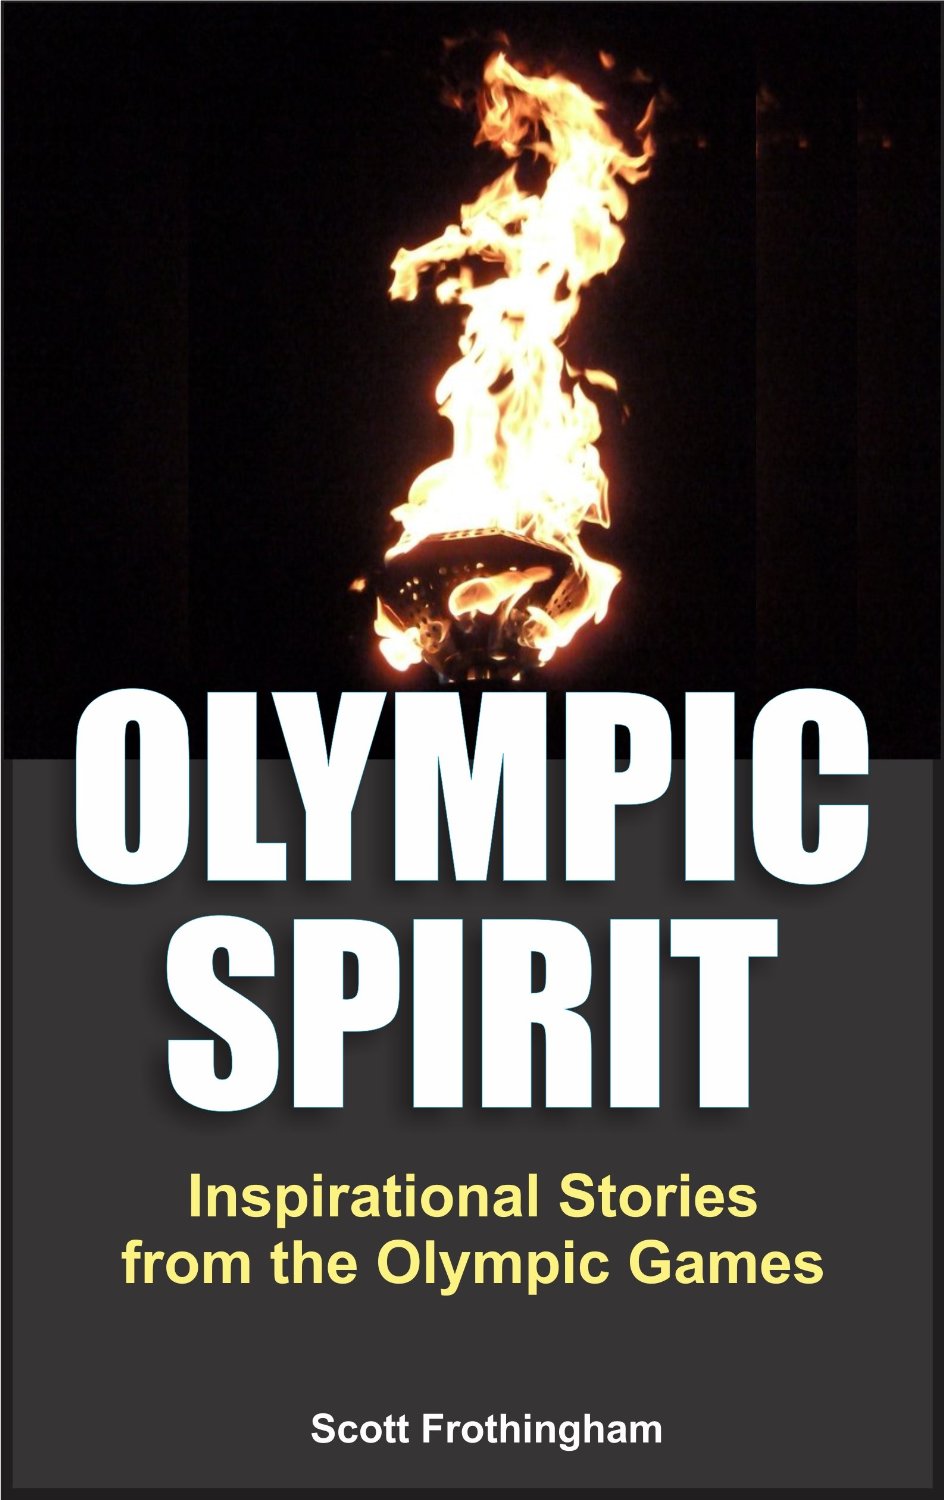 Olympic Spirit – Inspirational Stories from the Olympic Games by Scott Frothingham